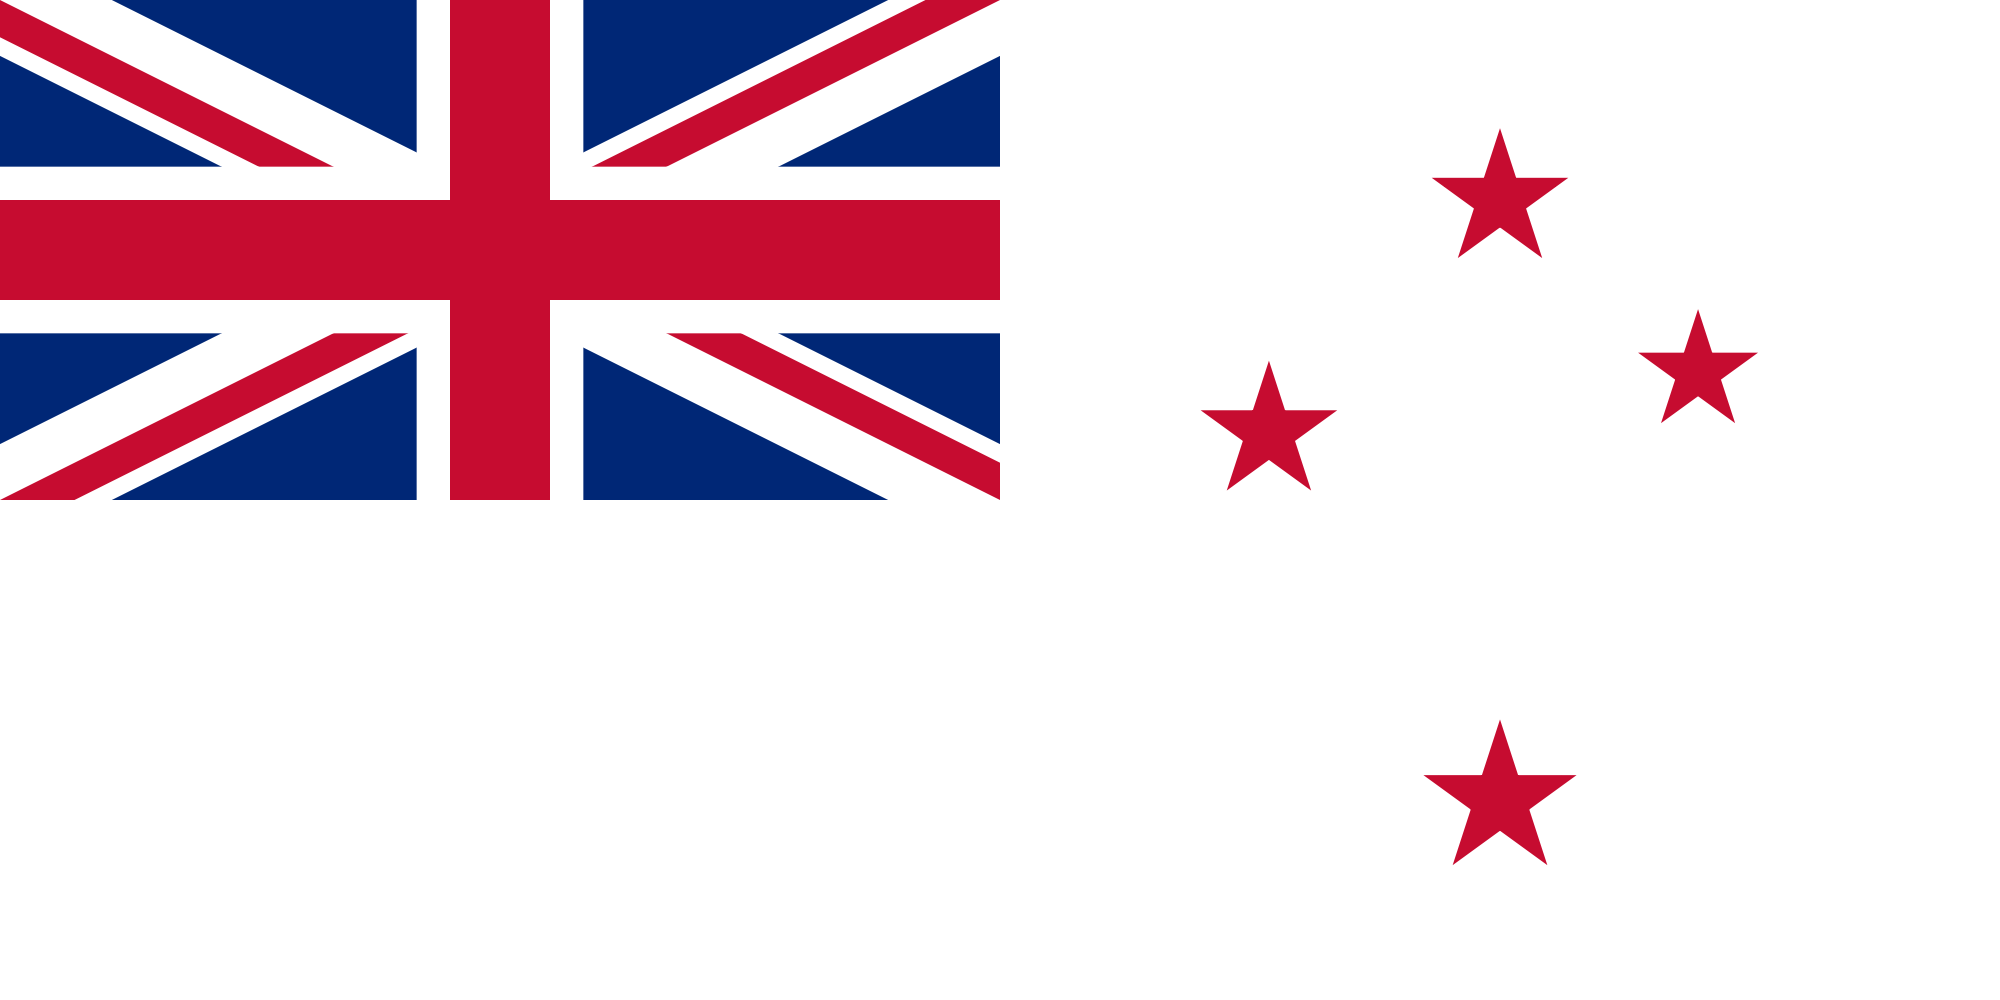 New Zealand (Naval ensign)